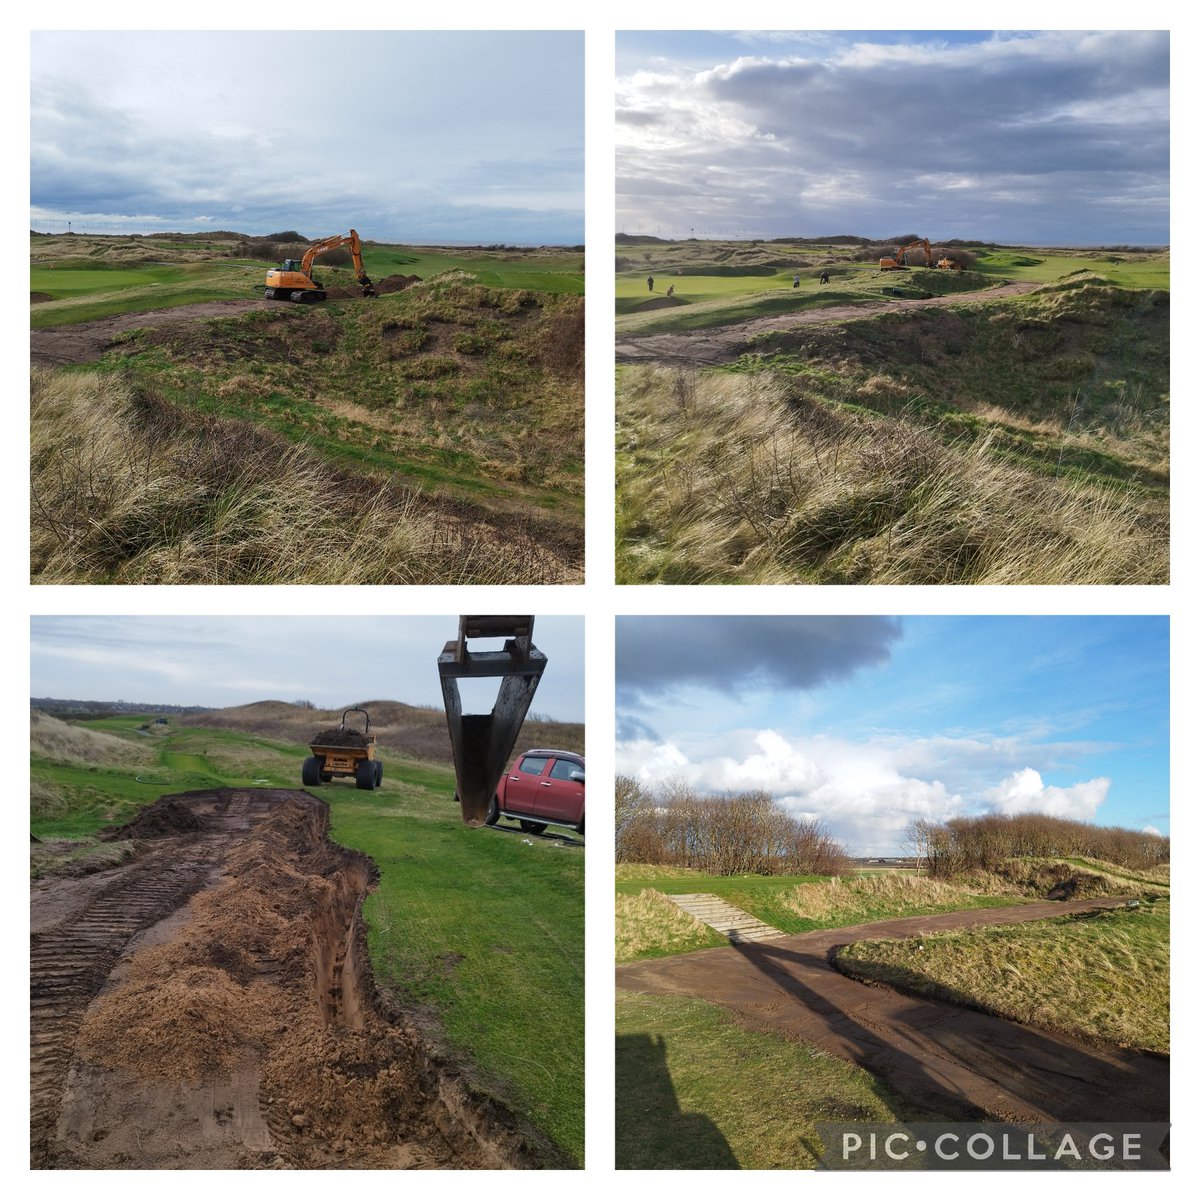 Great progress on grass path work on the 3rd and 13th holes @WestLancsGC this week with @westlancsgreens paths formed and irrigation in the rootzoned with what we screened monday. Even saw an hour or so of sunshine this afternoon 😎